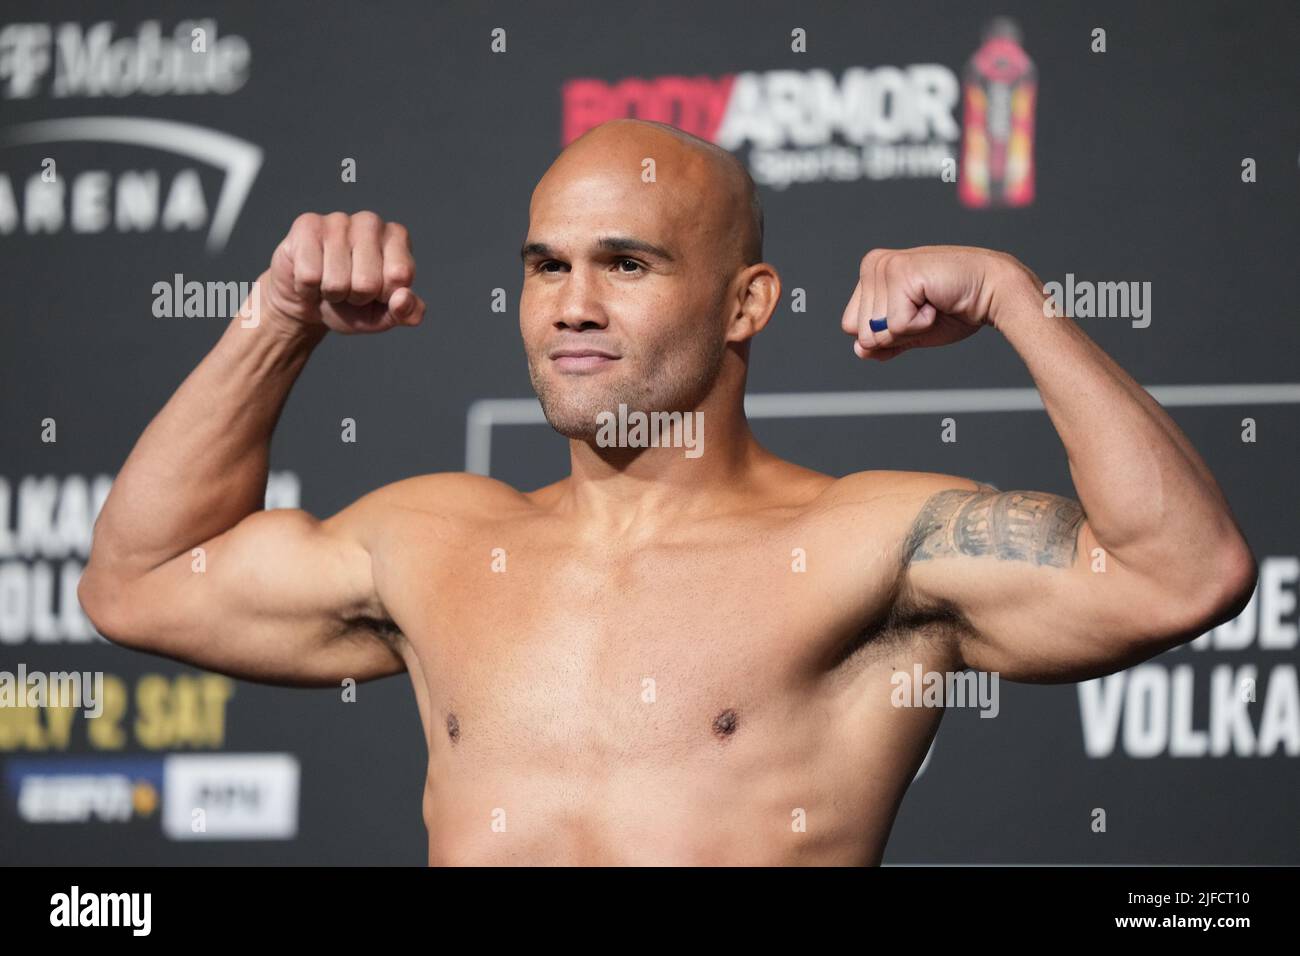 July 1, 2022, LAS VEGAS, NV, LAS VEGAS, NV, United States: LAS VEGAS, NV - June 1: Robbie Lawler steps on the scale for the official weigh-ins at T-Mobile Arena for UFC 276 on July 1, 2022 in LAS VEGAS, NV, United States. (Credit Image: © Louis Grasse/PX Imagens via ZUMA Press Wire) Stock Photo